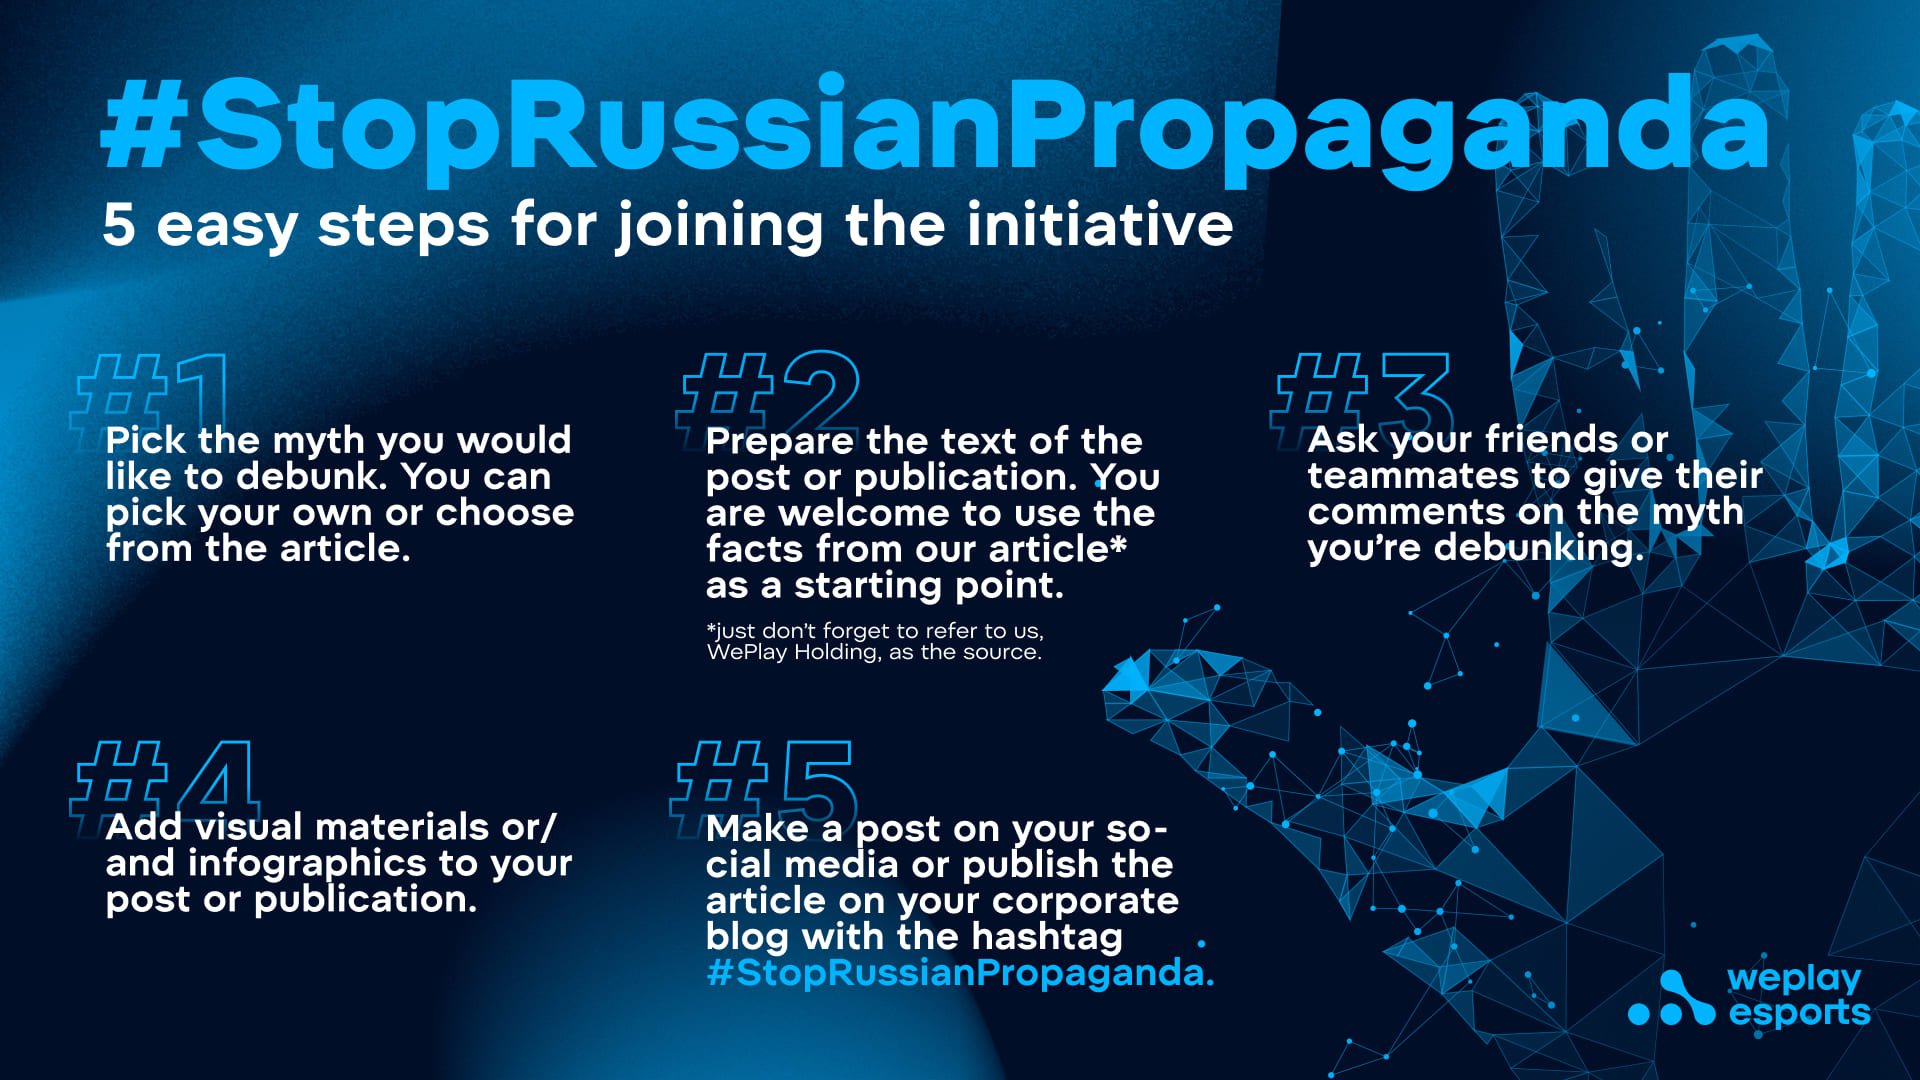 5 easy steps for joining the #StopRussianPropaganda initiative. Visual: WePlay Holding